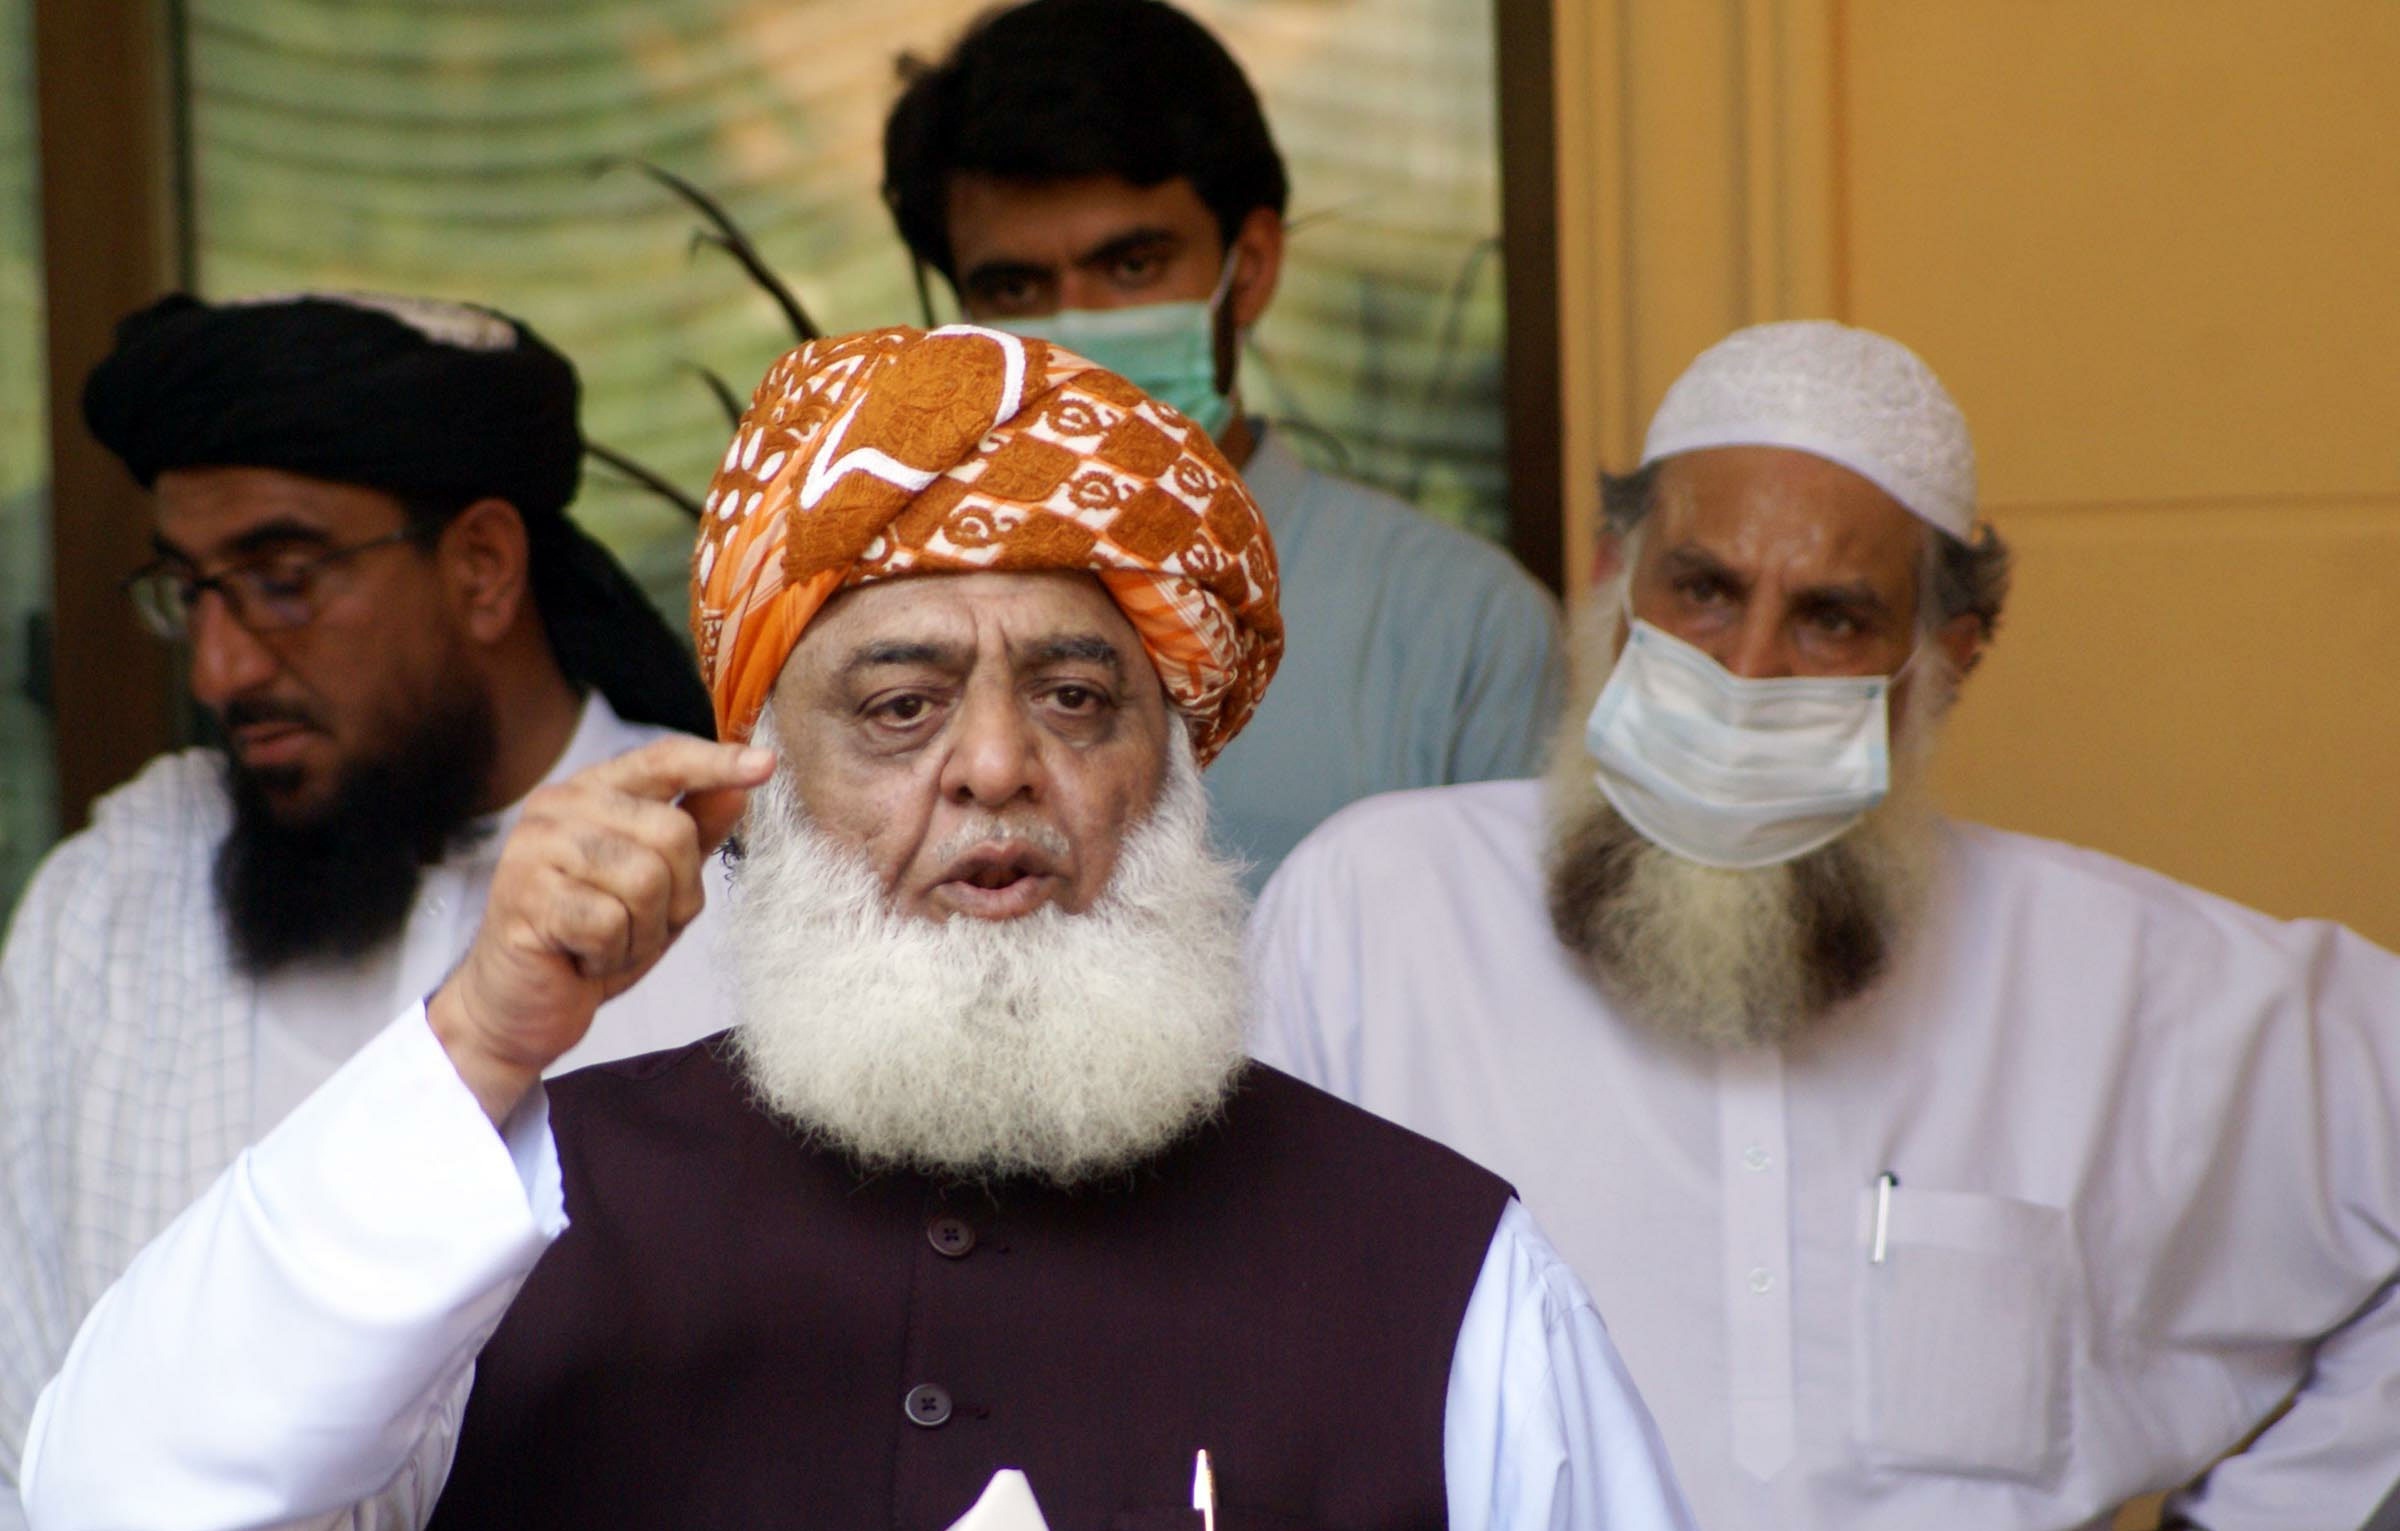 JUI-F is ready to collaborate with PML-N to foster Pakistan's prosperity, says Fazl